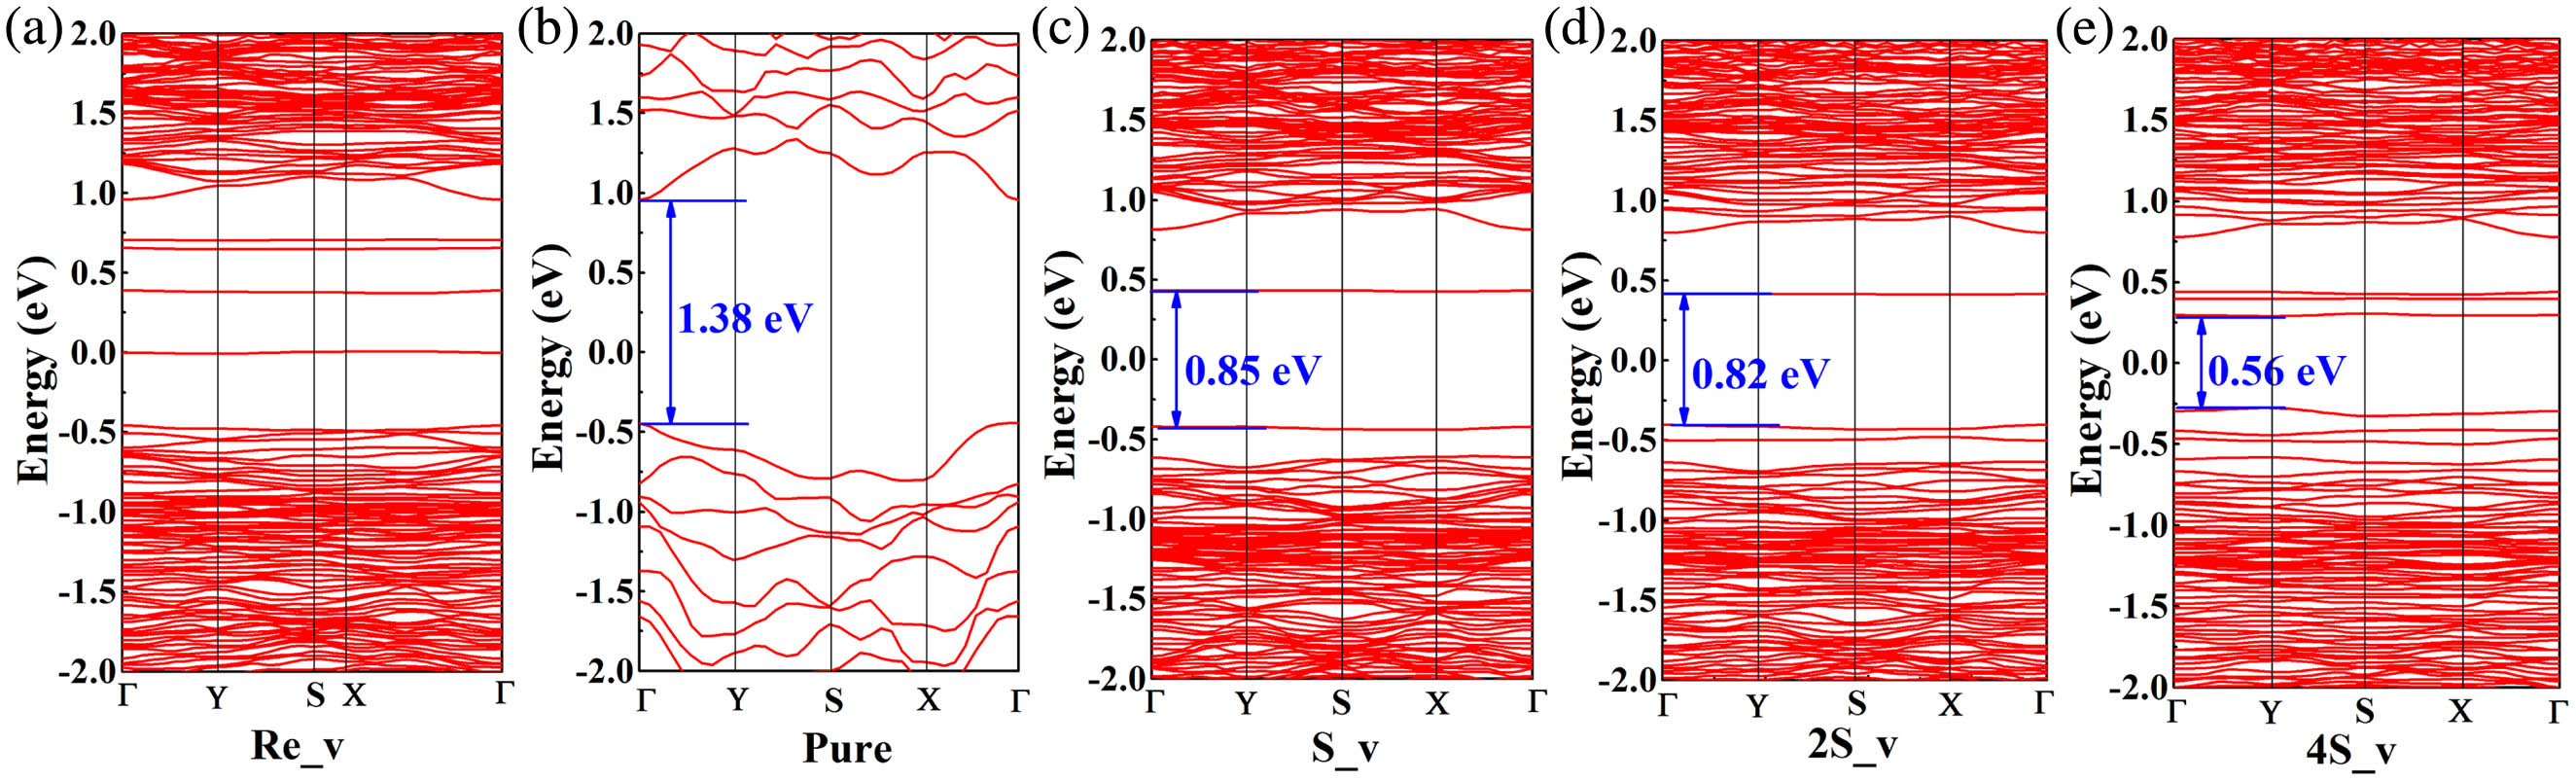 Theoretical band structure of monolayer ReS2. (a) R=1∶2.057, (b) R=1∶2, (c) R=1∶1.972, (d) R=1∶1.944, and (e) R=1∶1.889.